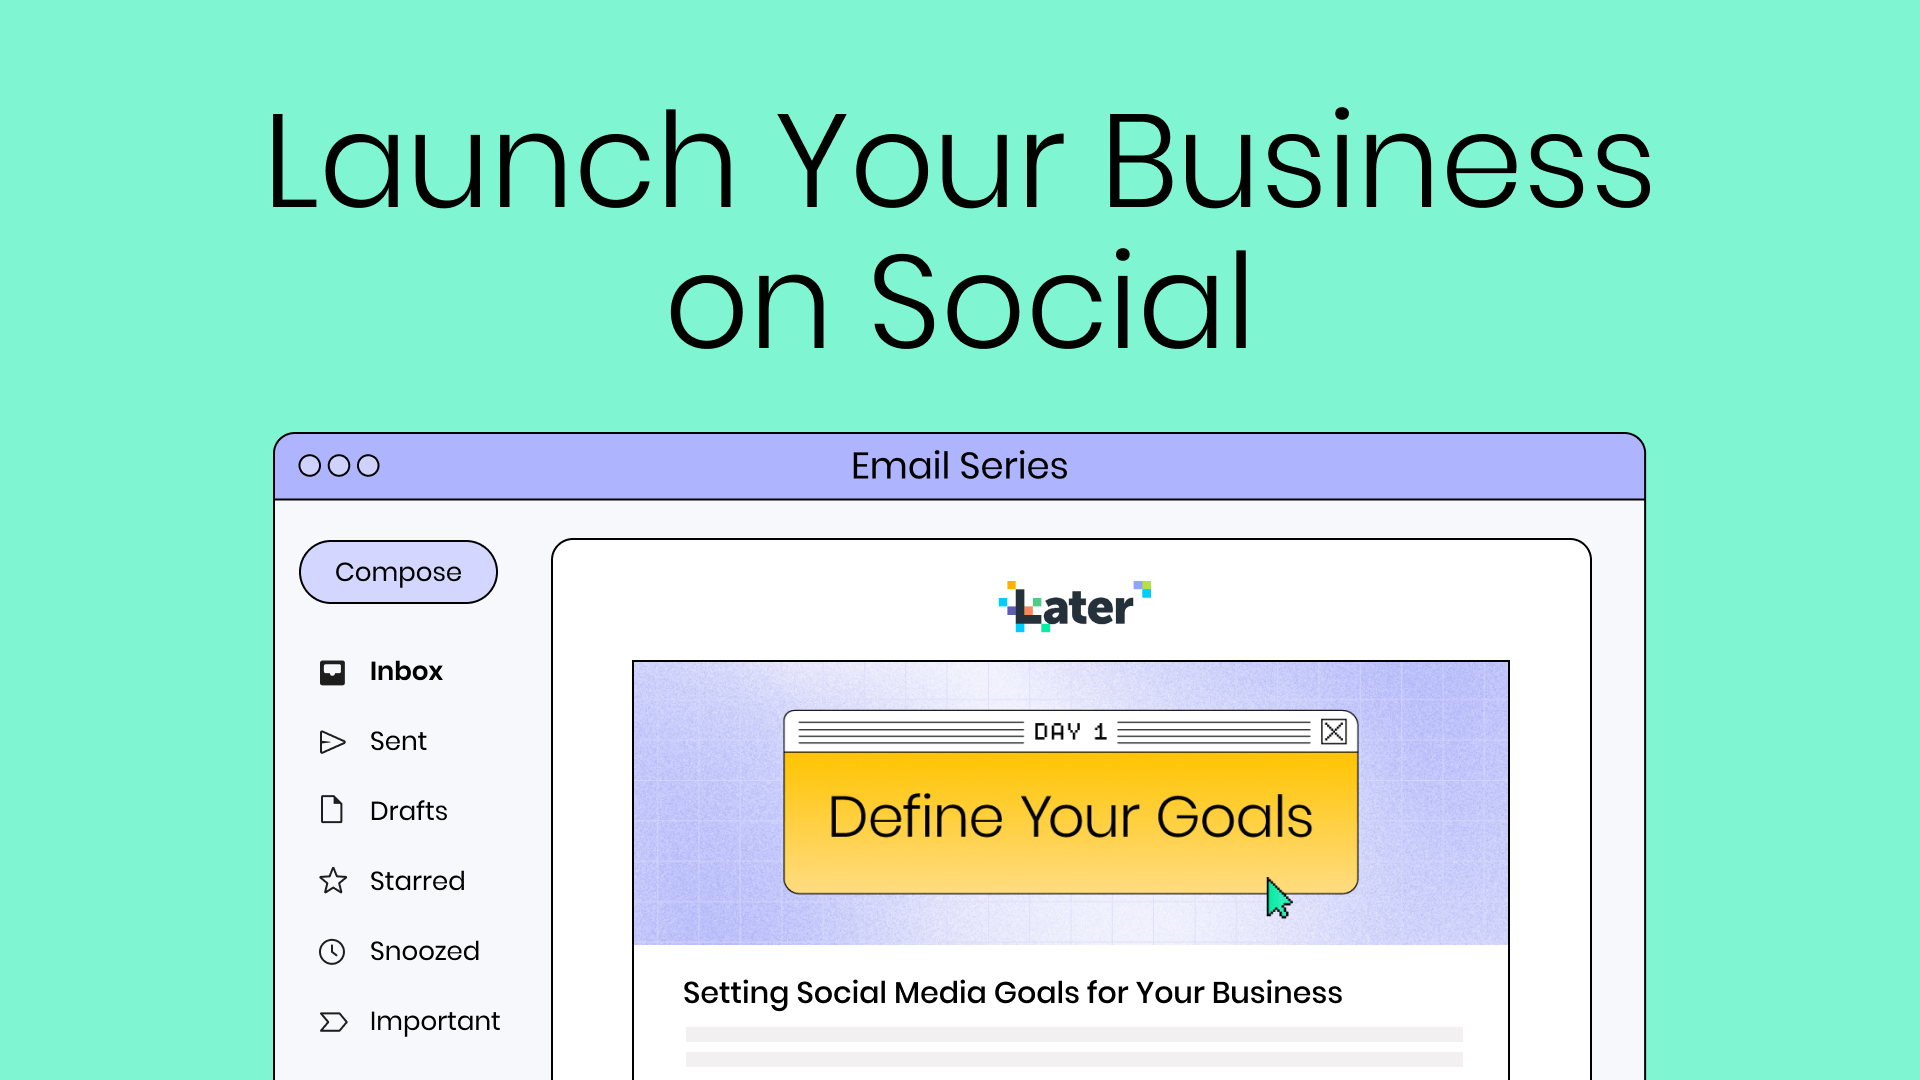 How to Launch Your Business on Social Media